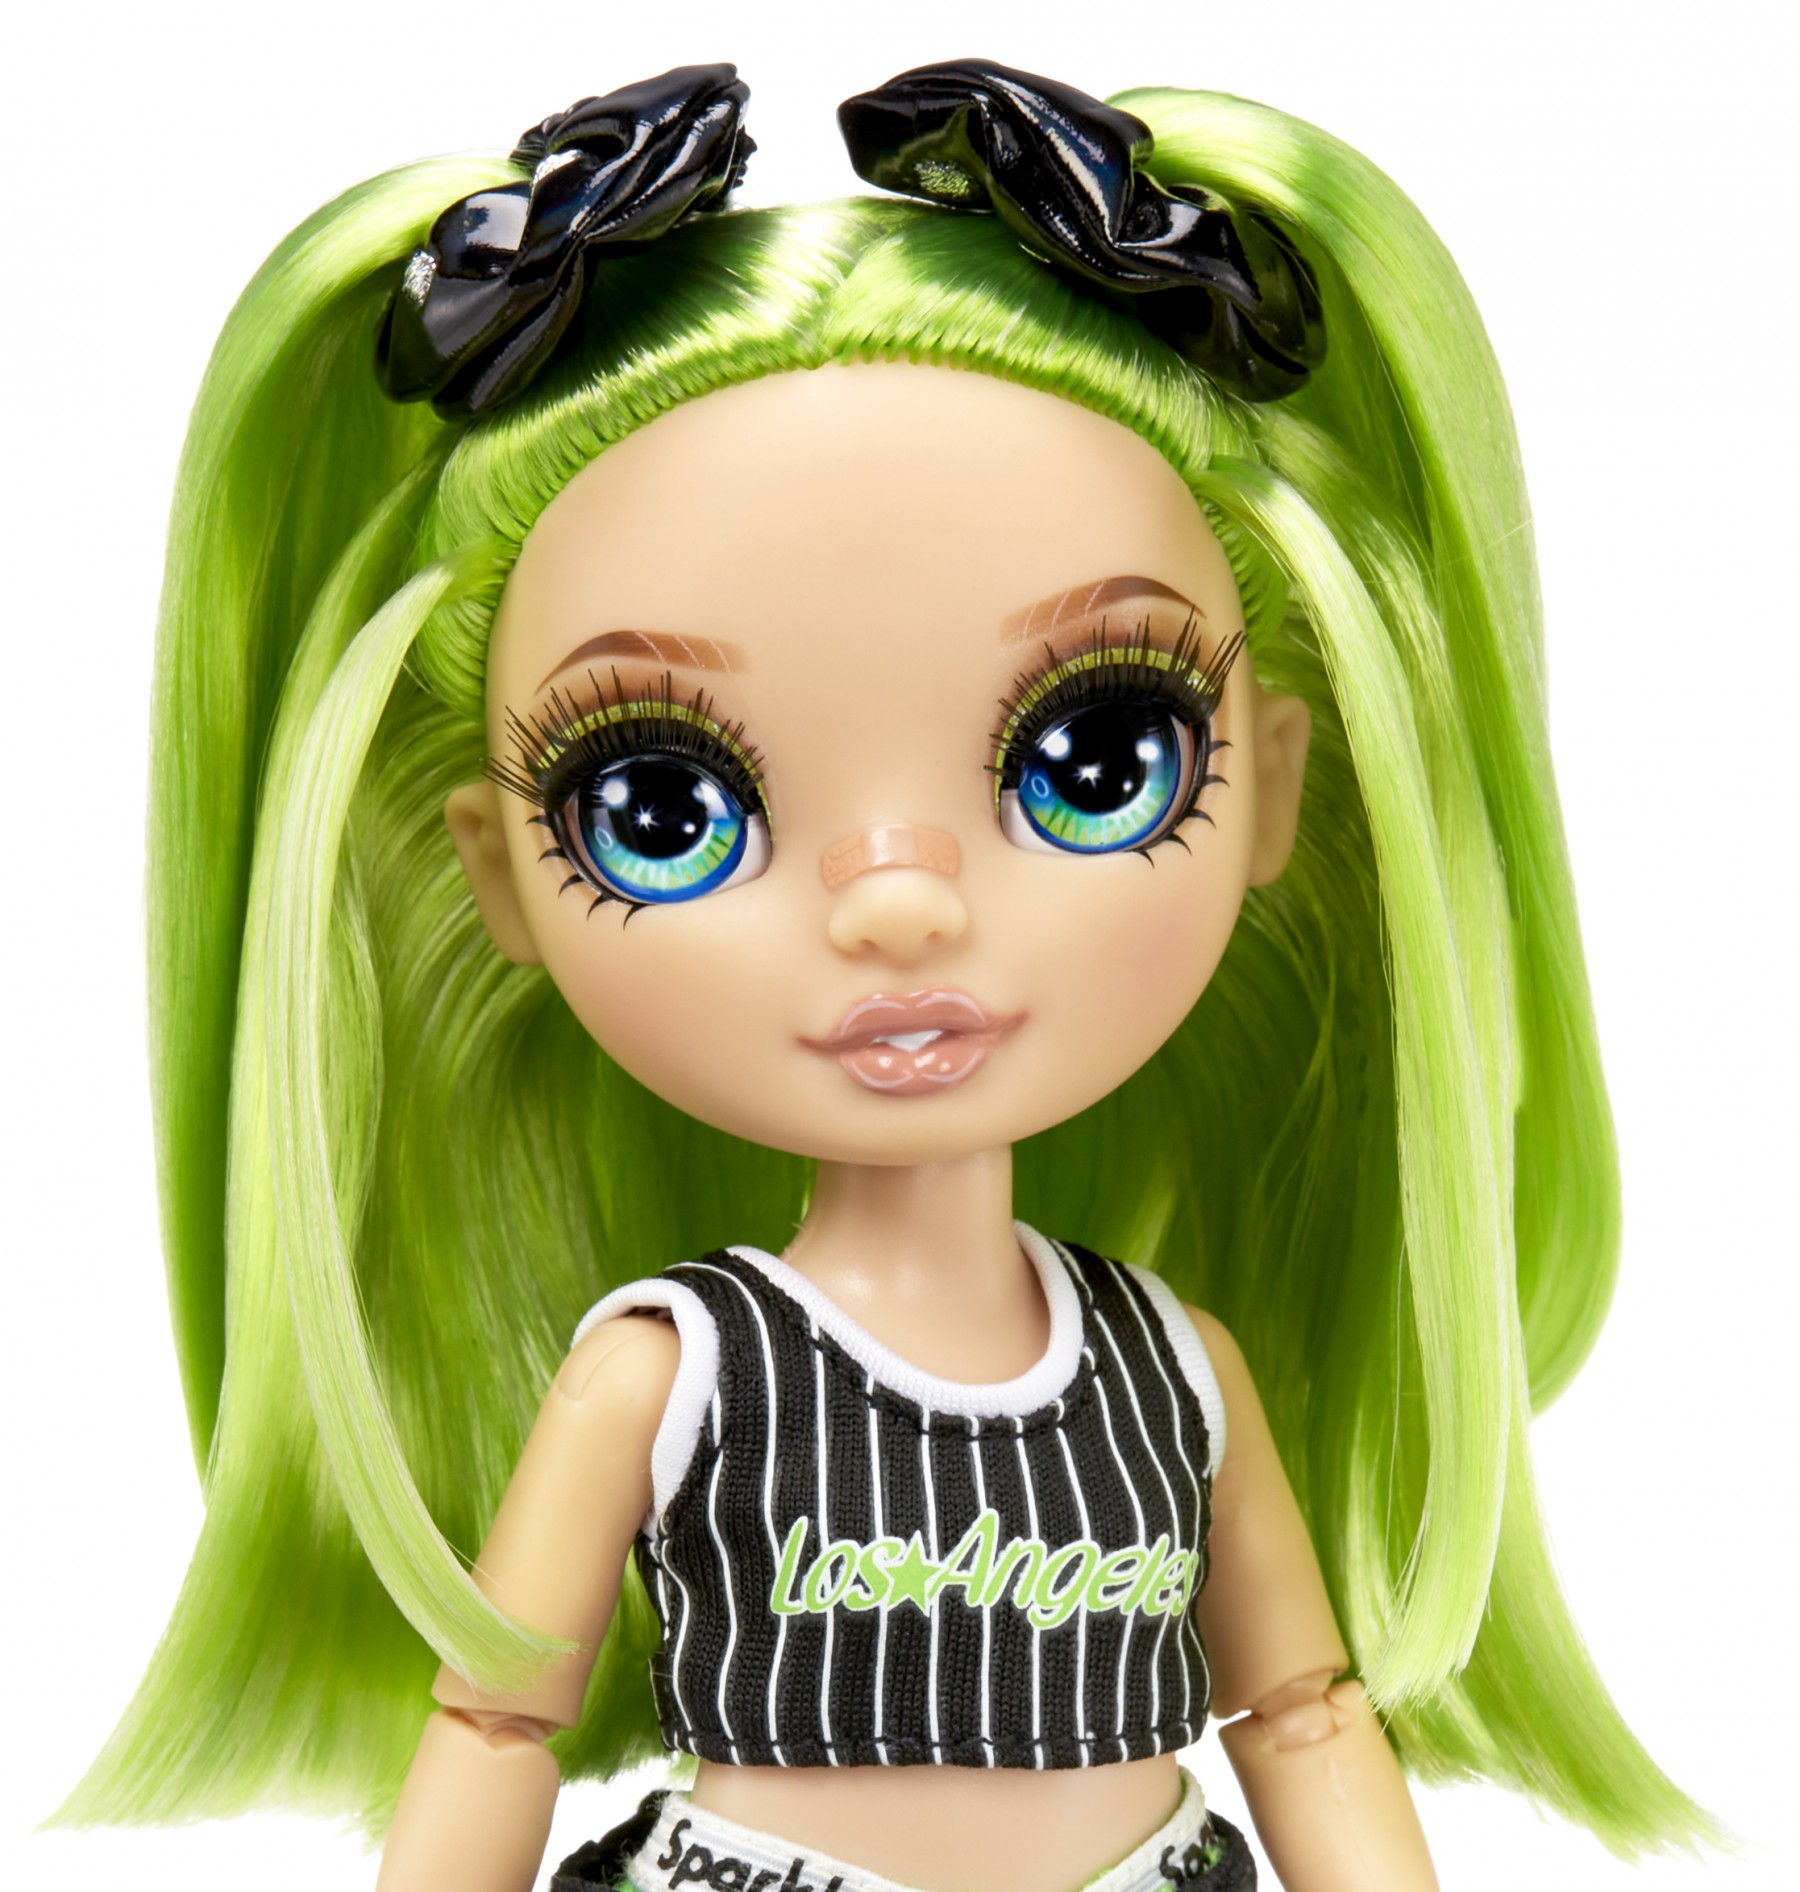  Rainbow High Exclusive 5 Pack Junior High Fashion Doll  Favorites : Toys & Games